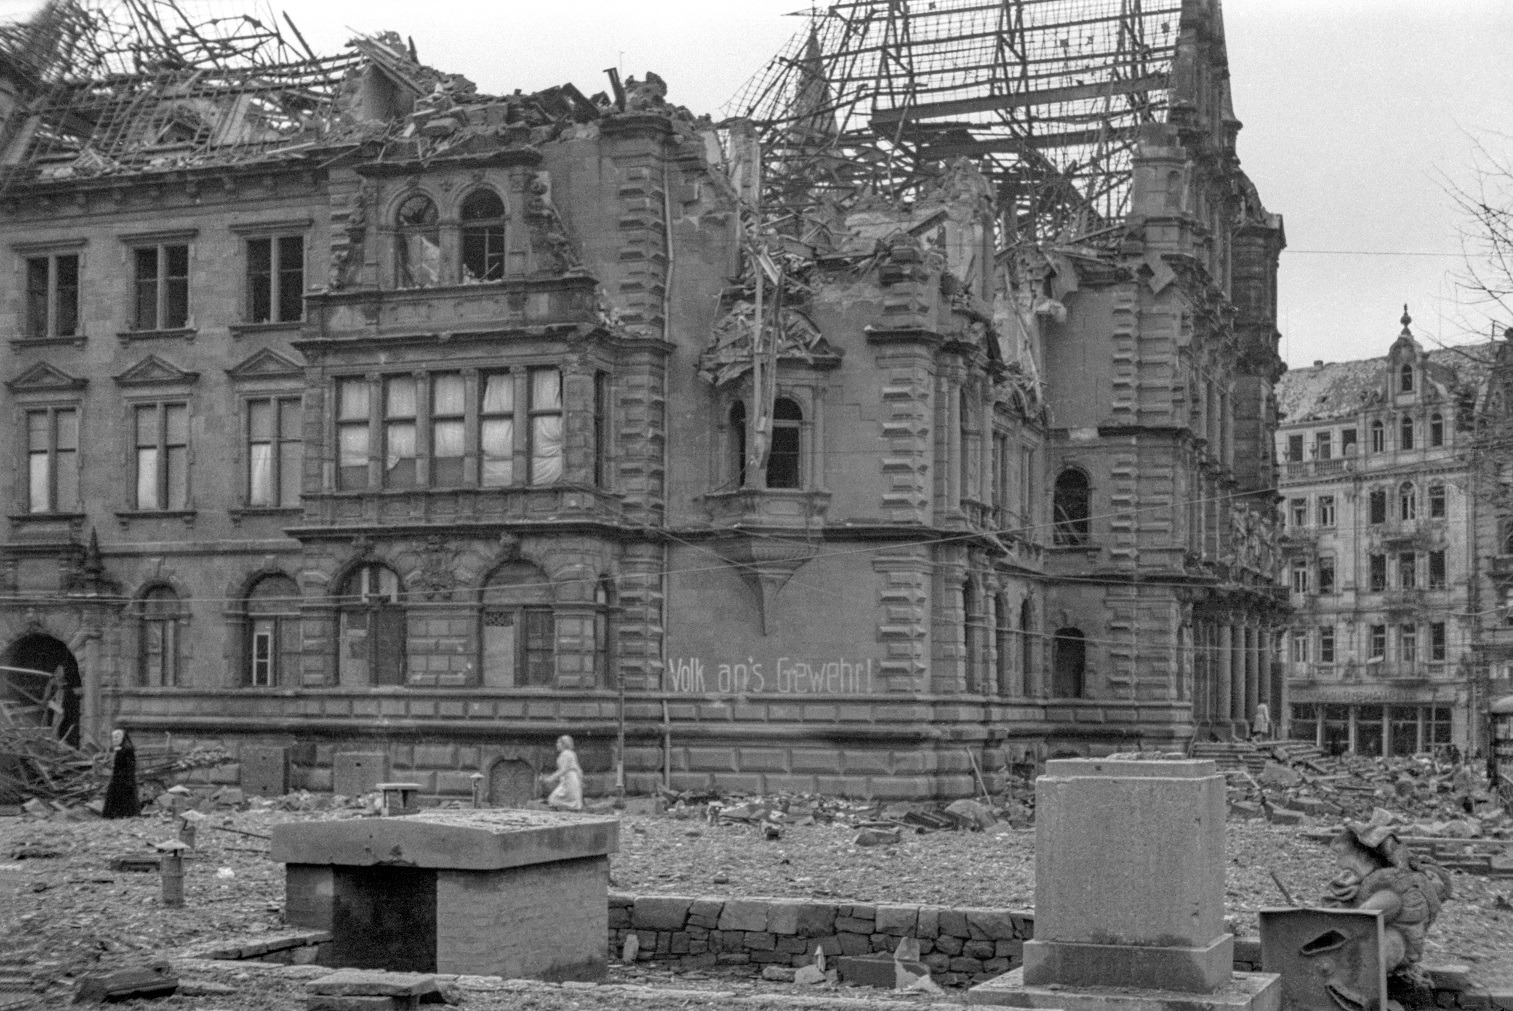 The damaged Wiesbaden City Hall in 1945. Photographer: Willi Rudolph. StadtA WI, collection Willi Rudolph